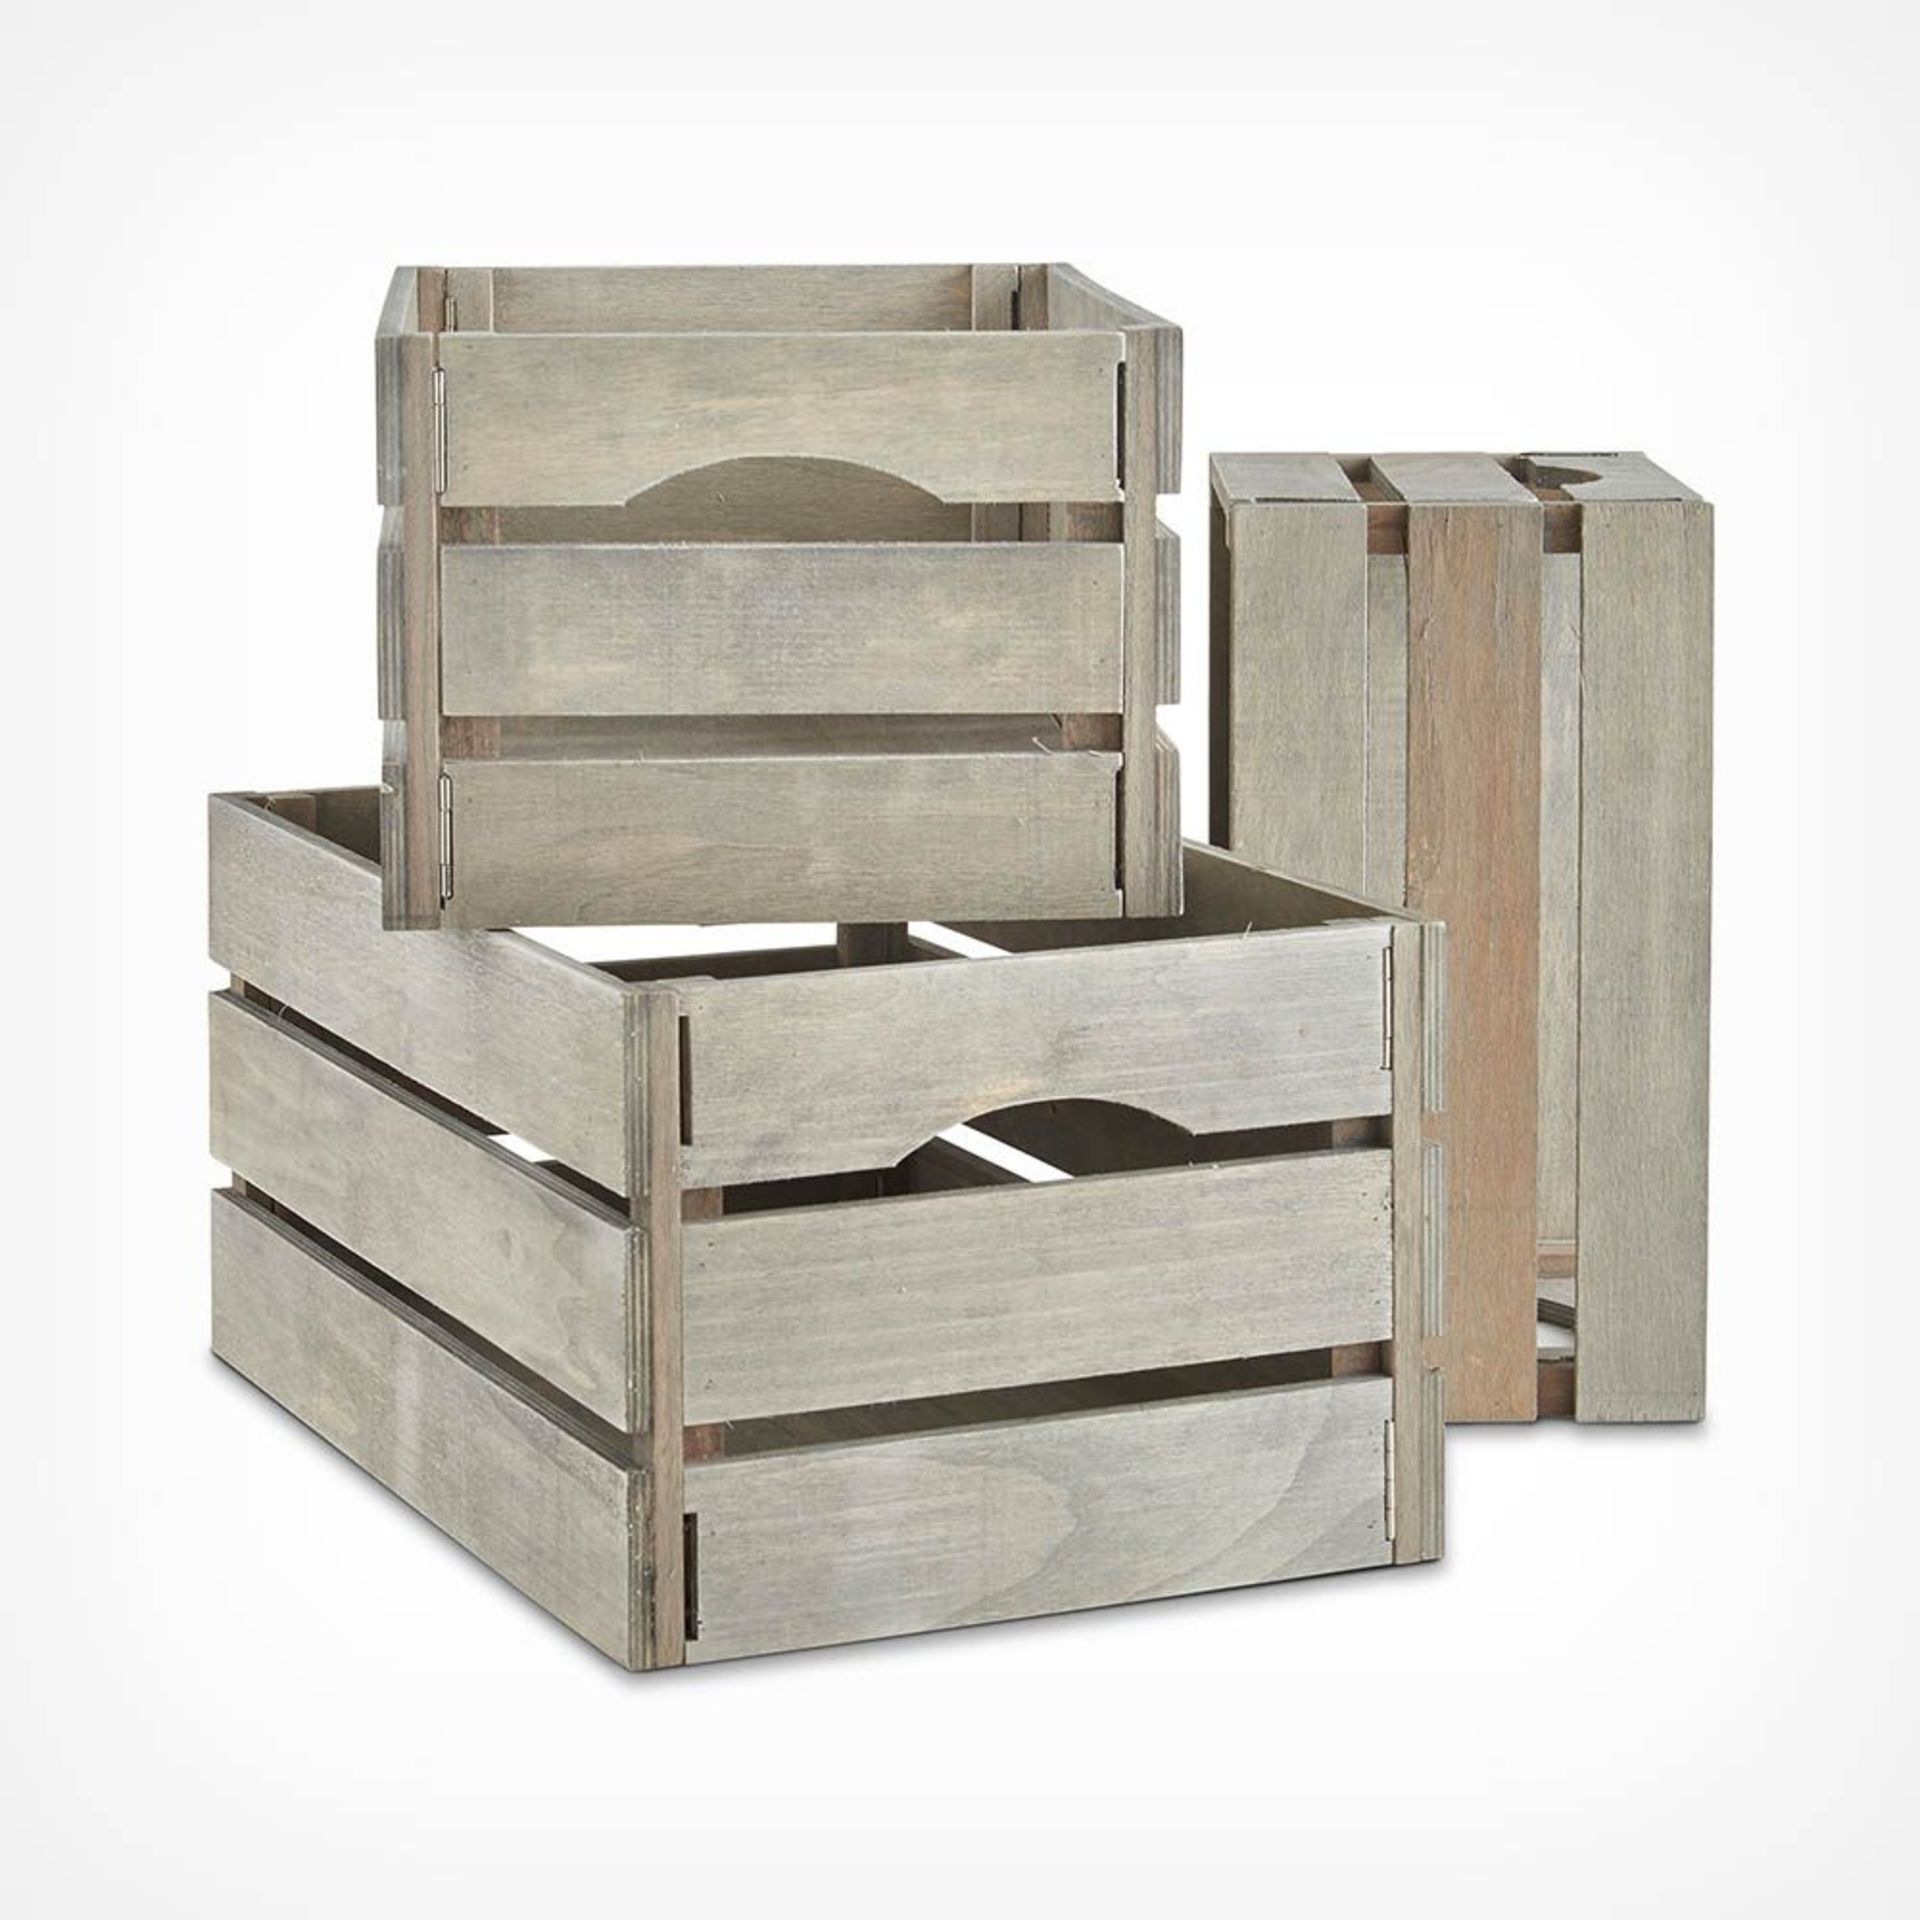 Set of 3 Grey Storage Crates. Do you have lots of bits and bobs that need a home? Say goodbye to